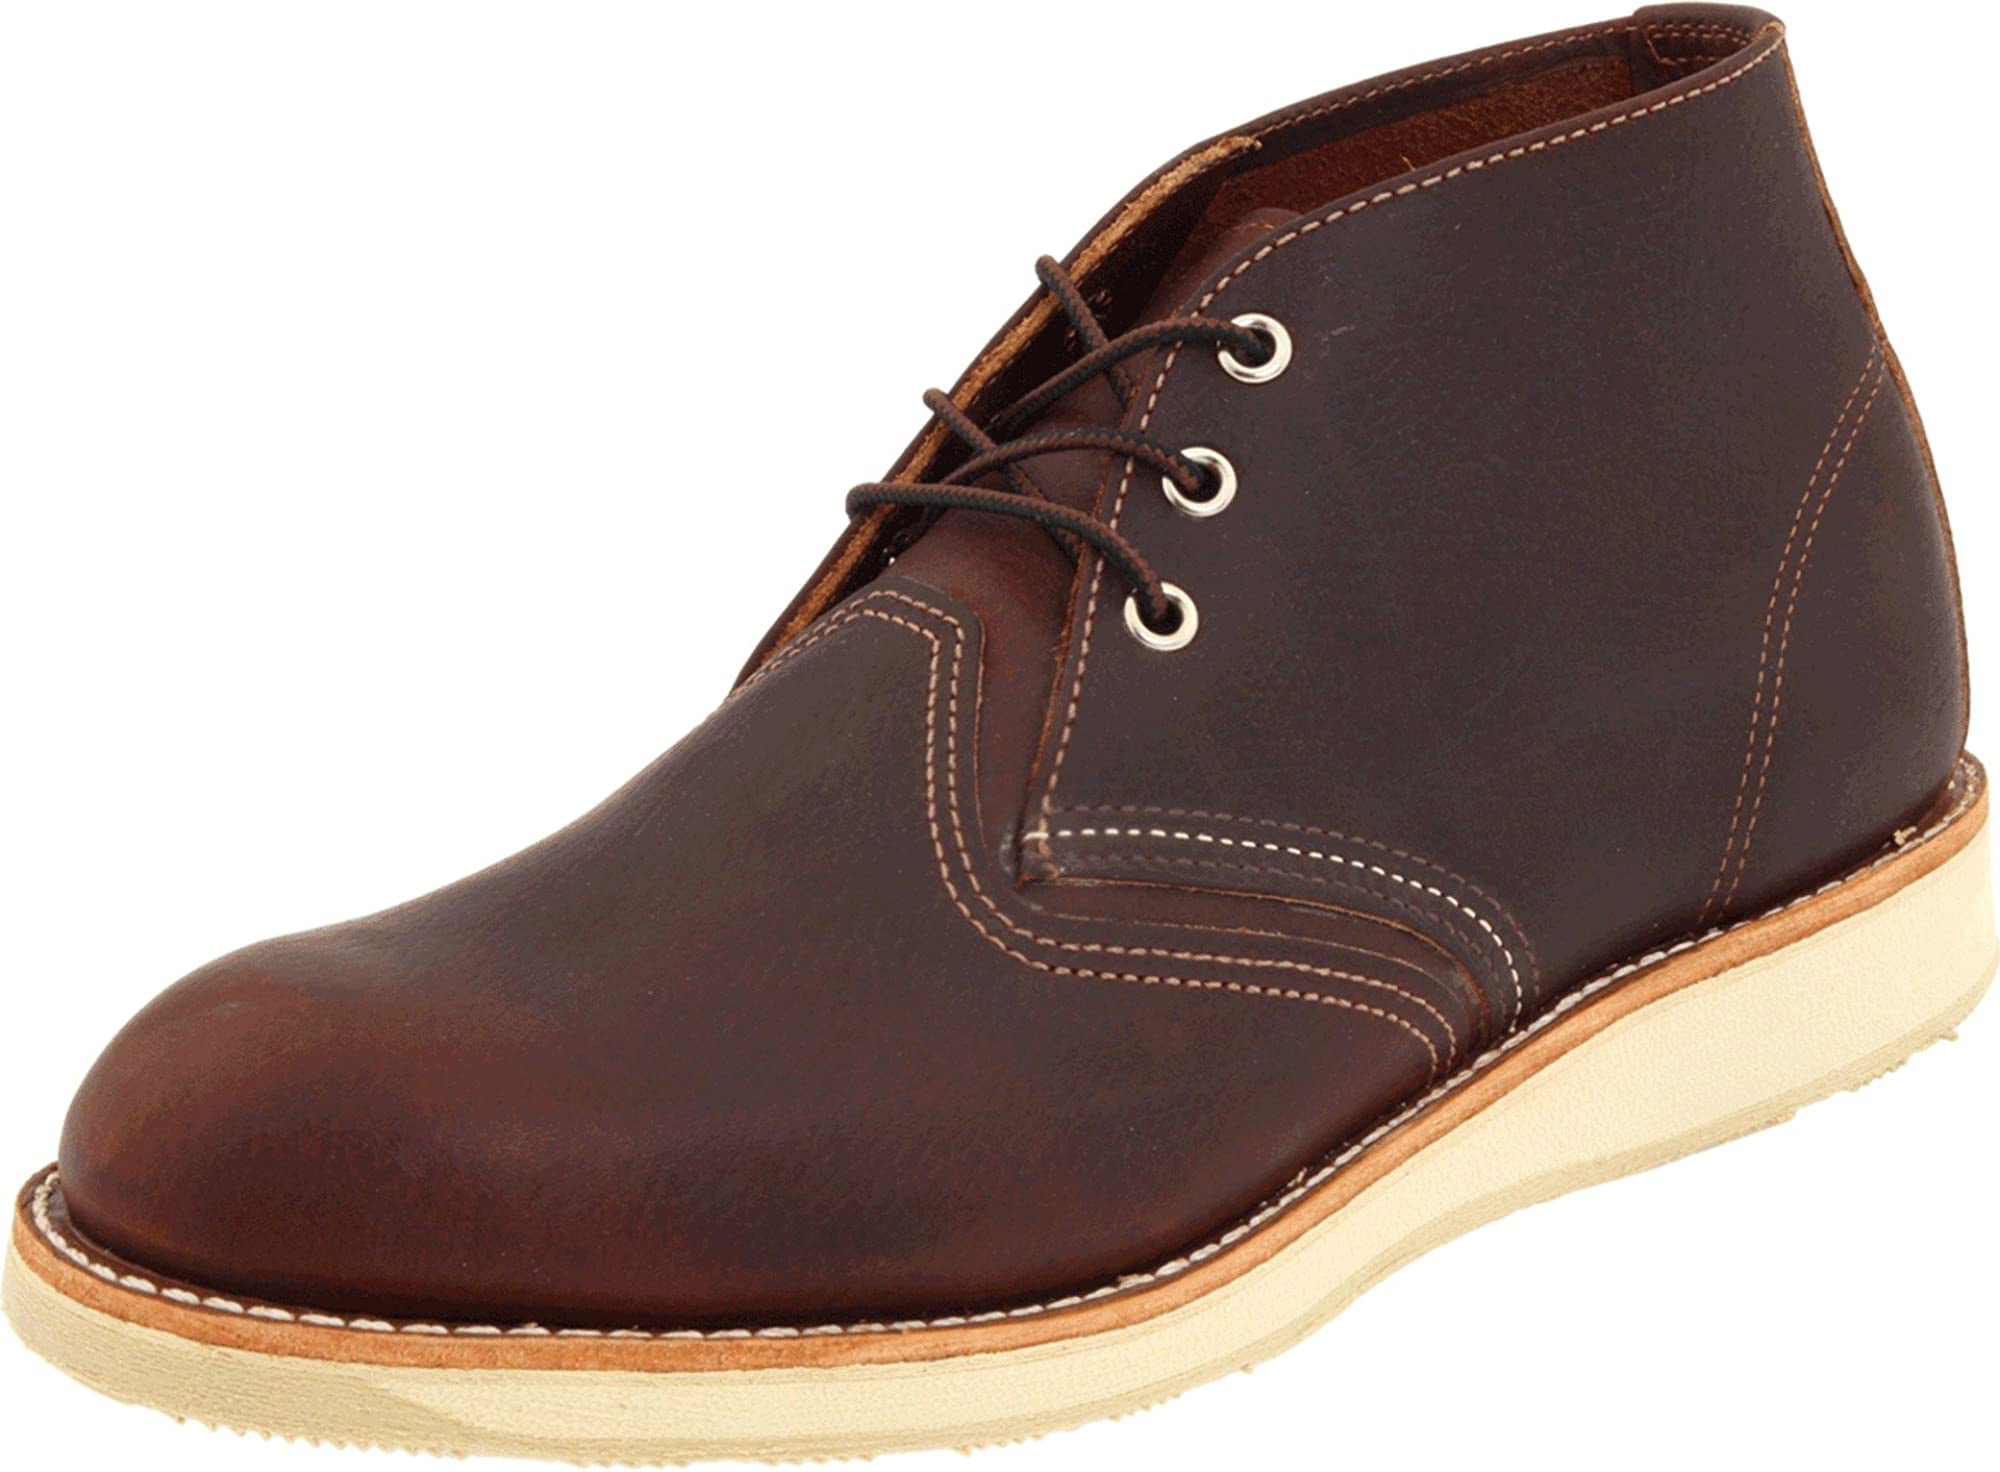 Red Wing Shoes | Walmart Canada